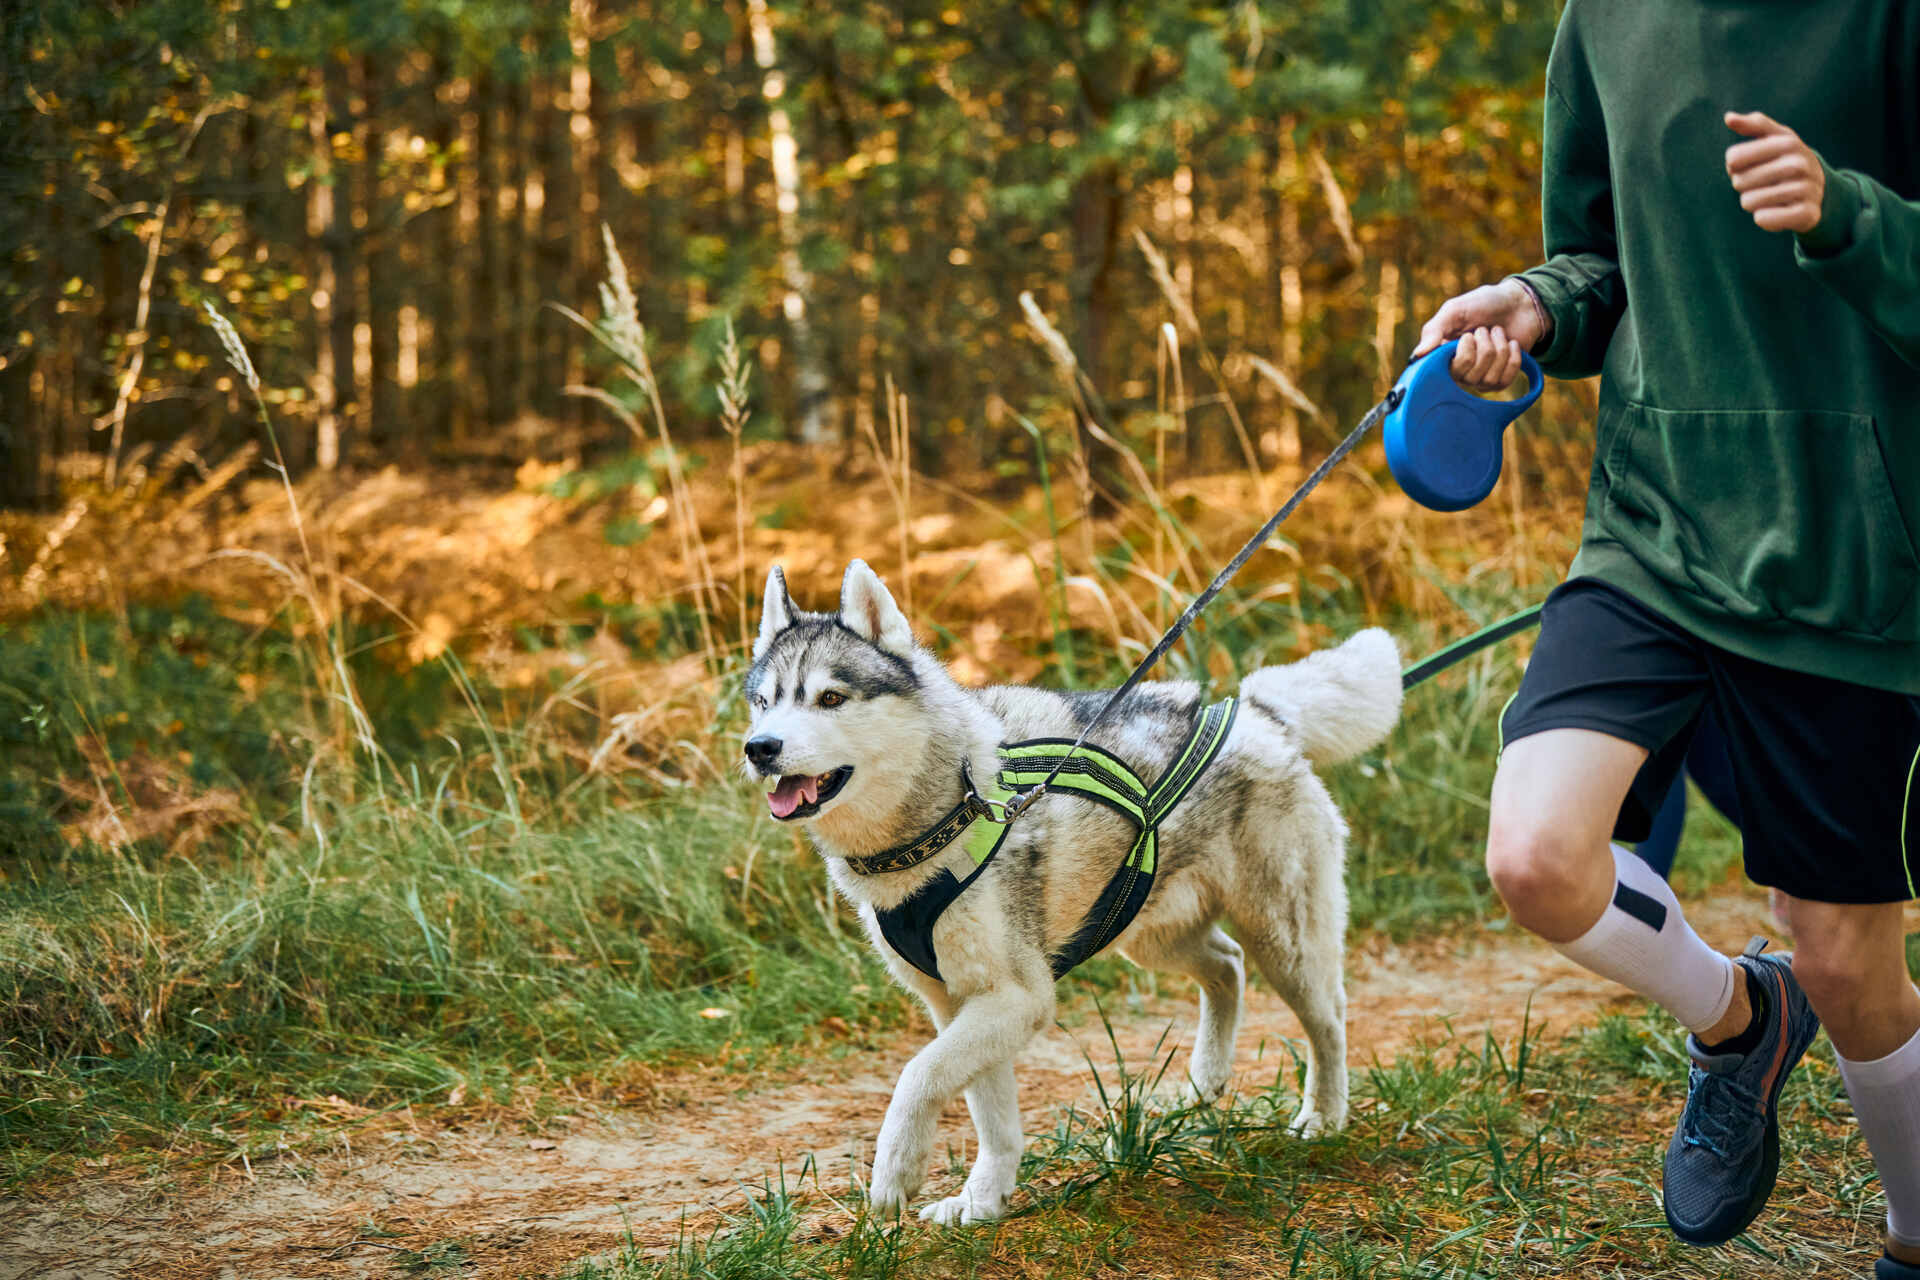 A man jogging through the woods with a dog on a harness